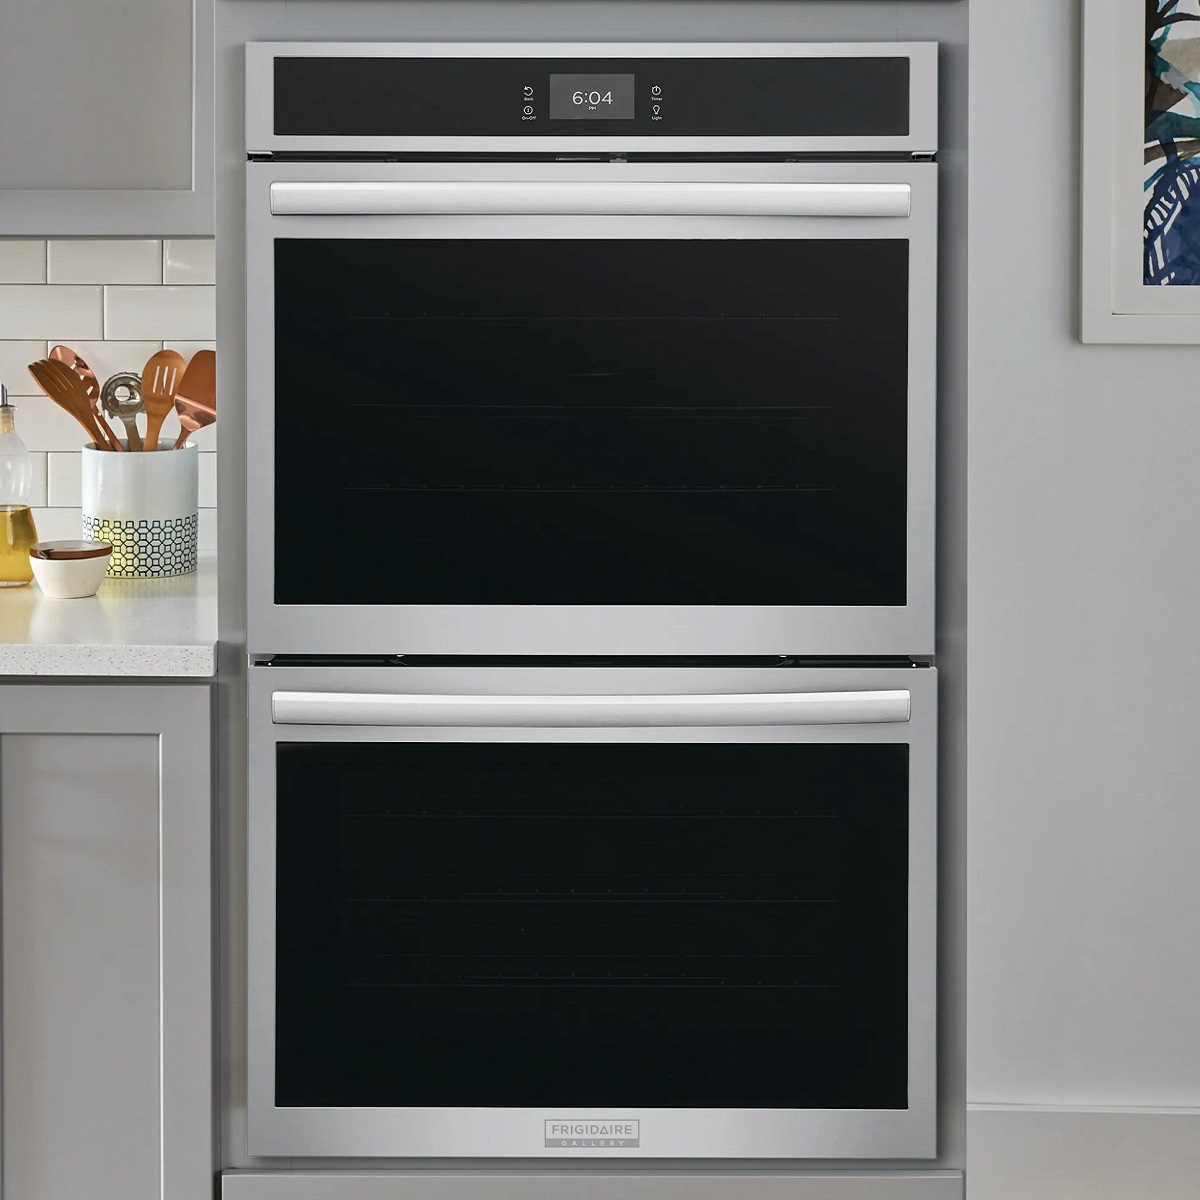 12 Amazing 27 Inch Double Electric Wall Ovens For 2023 1693187329 